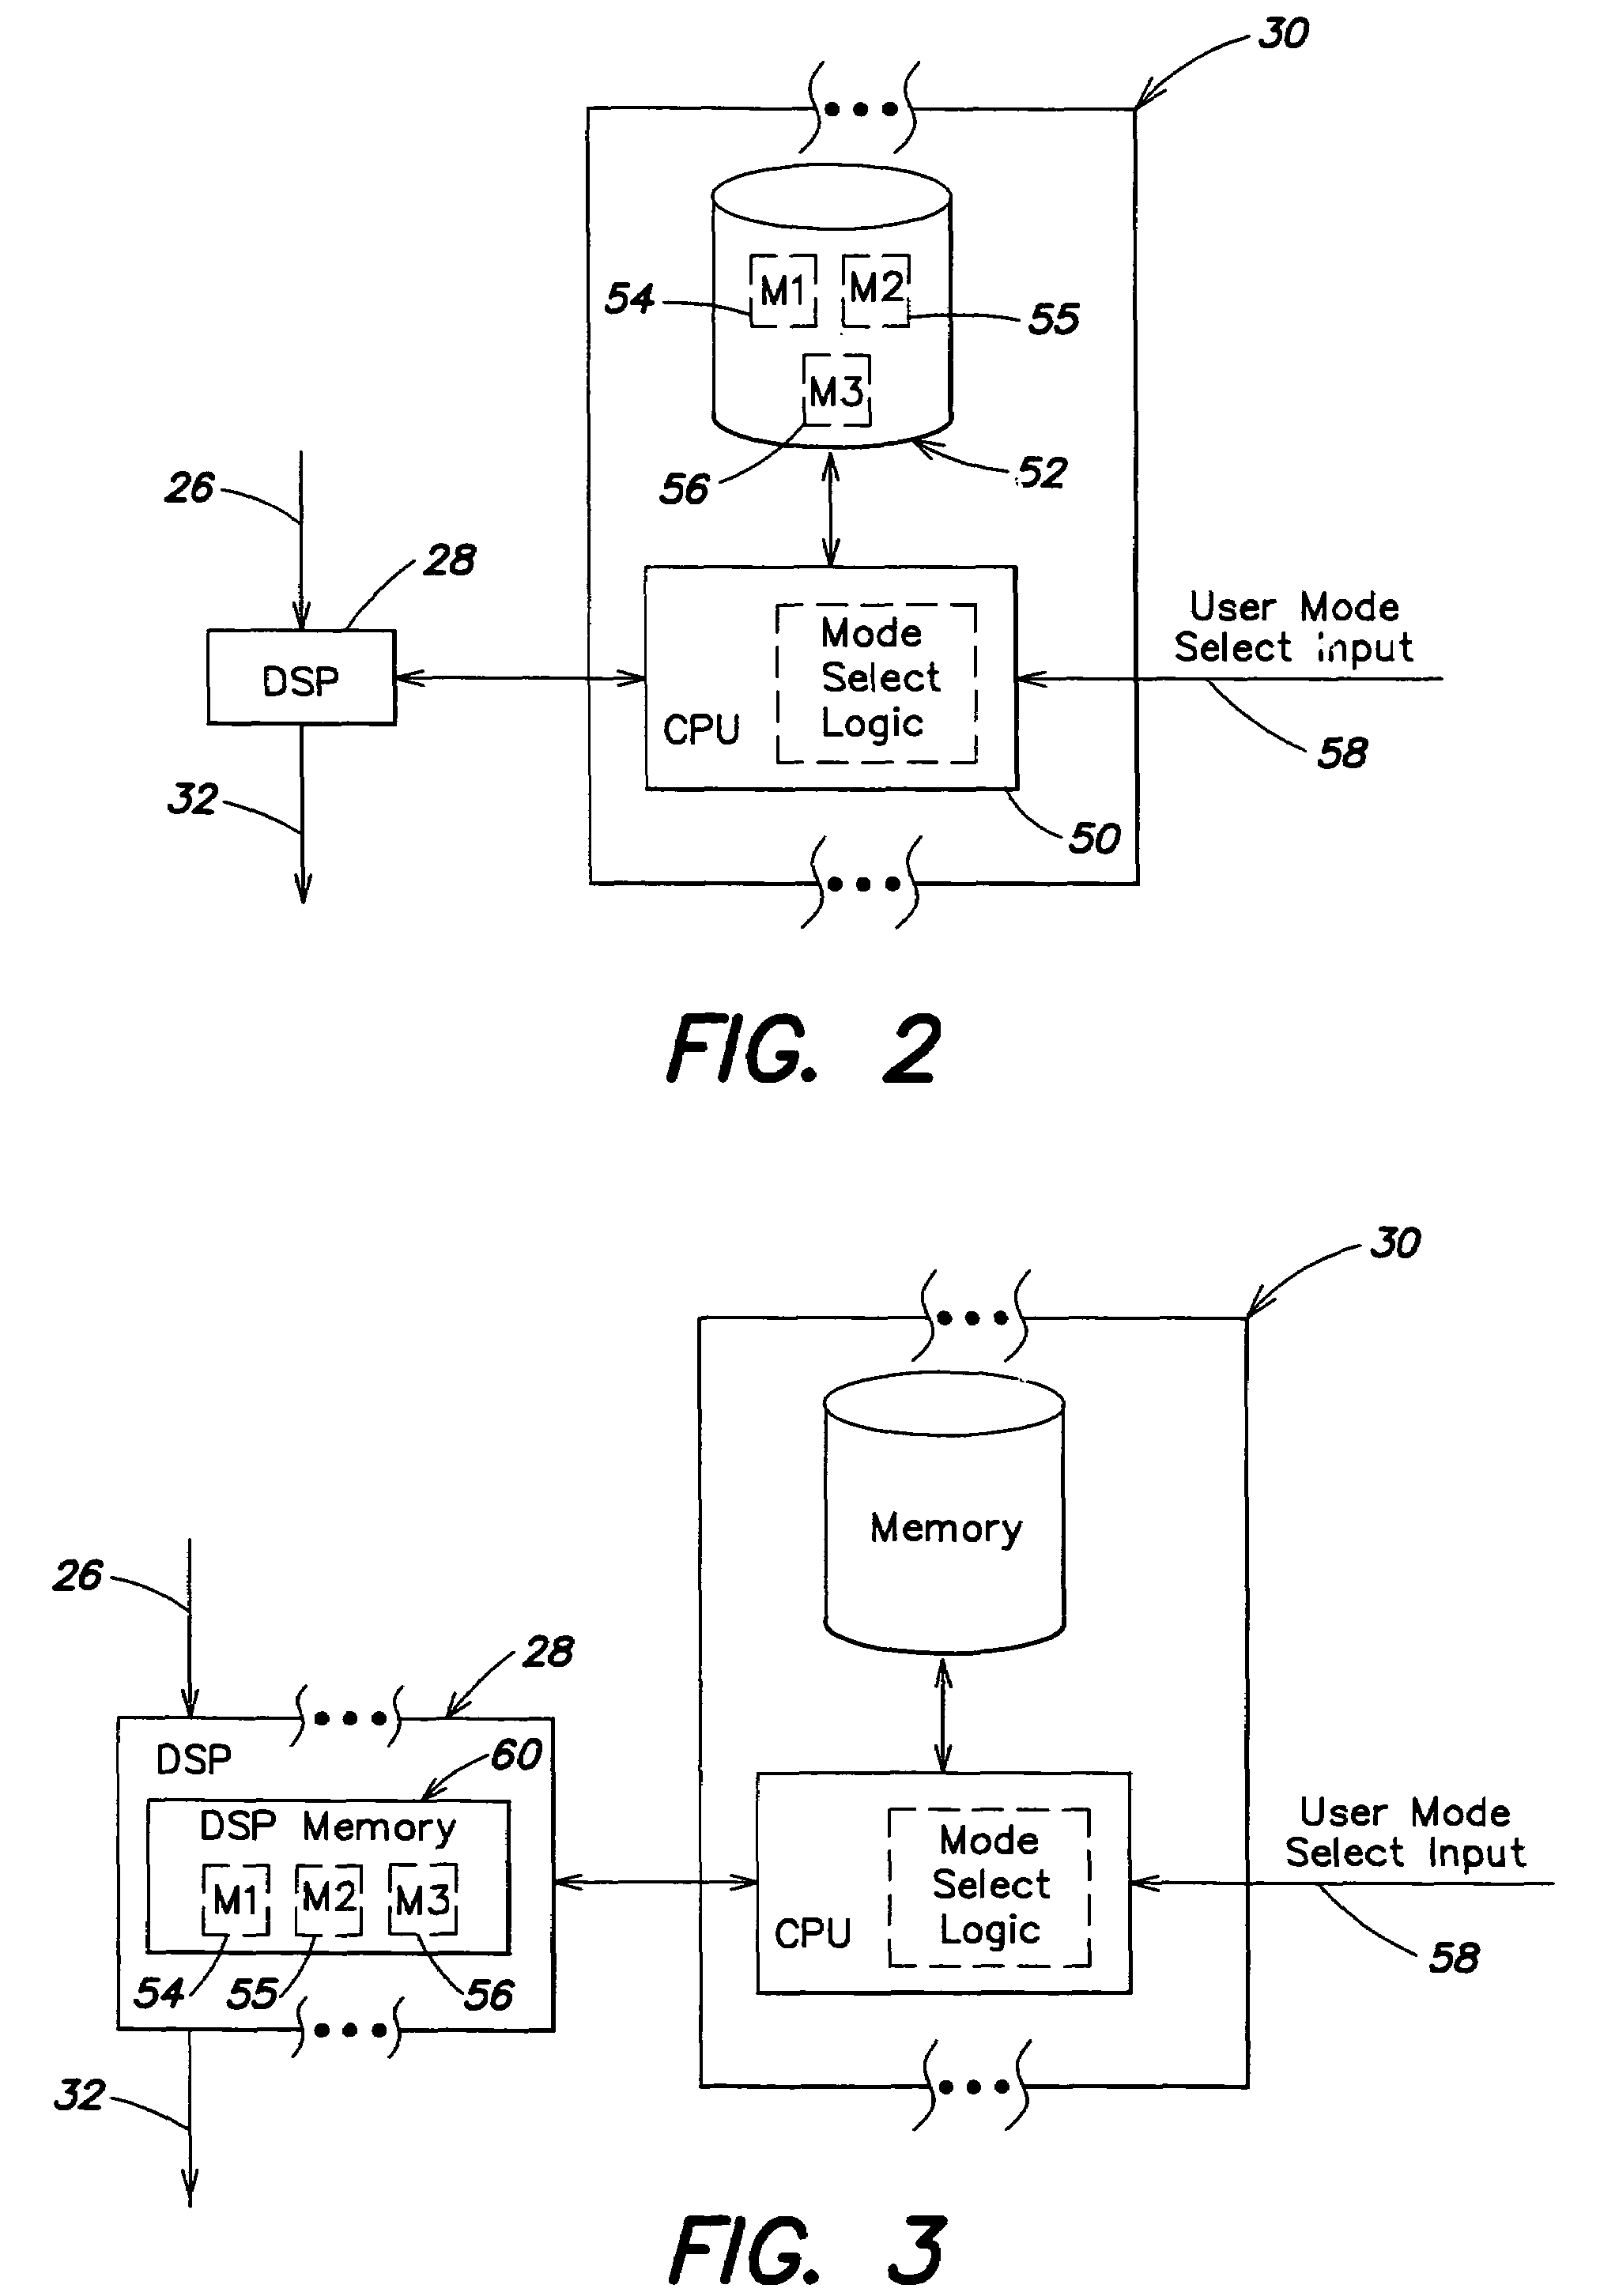 Apparatus for neuromuscular measurement and control